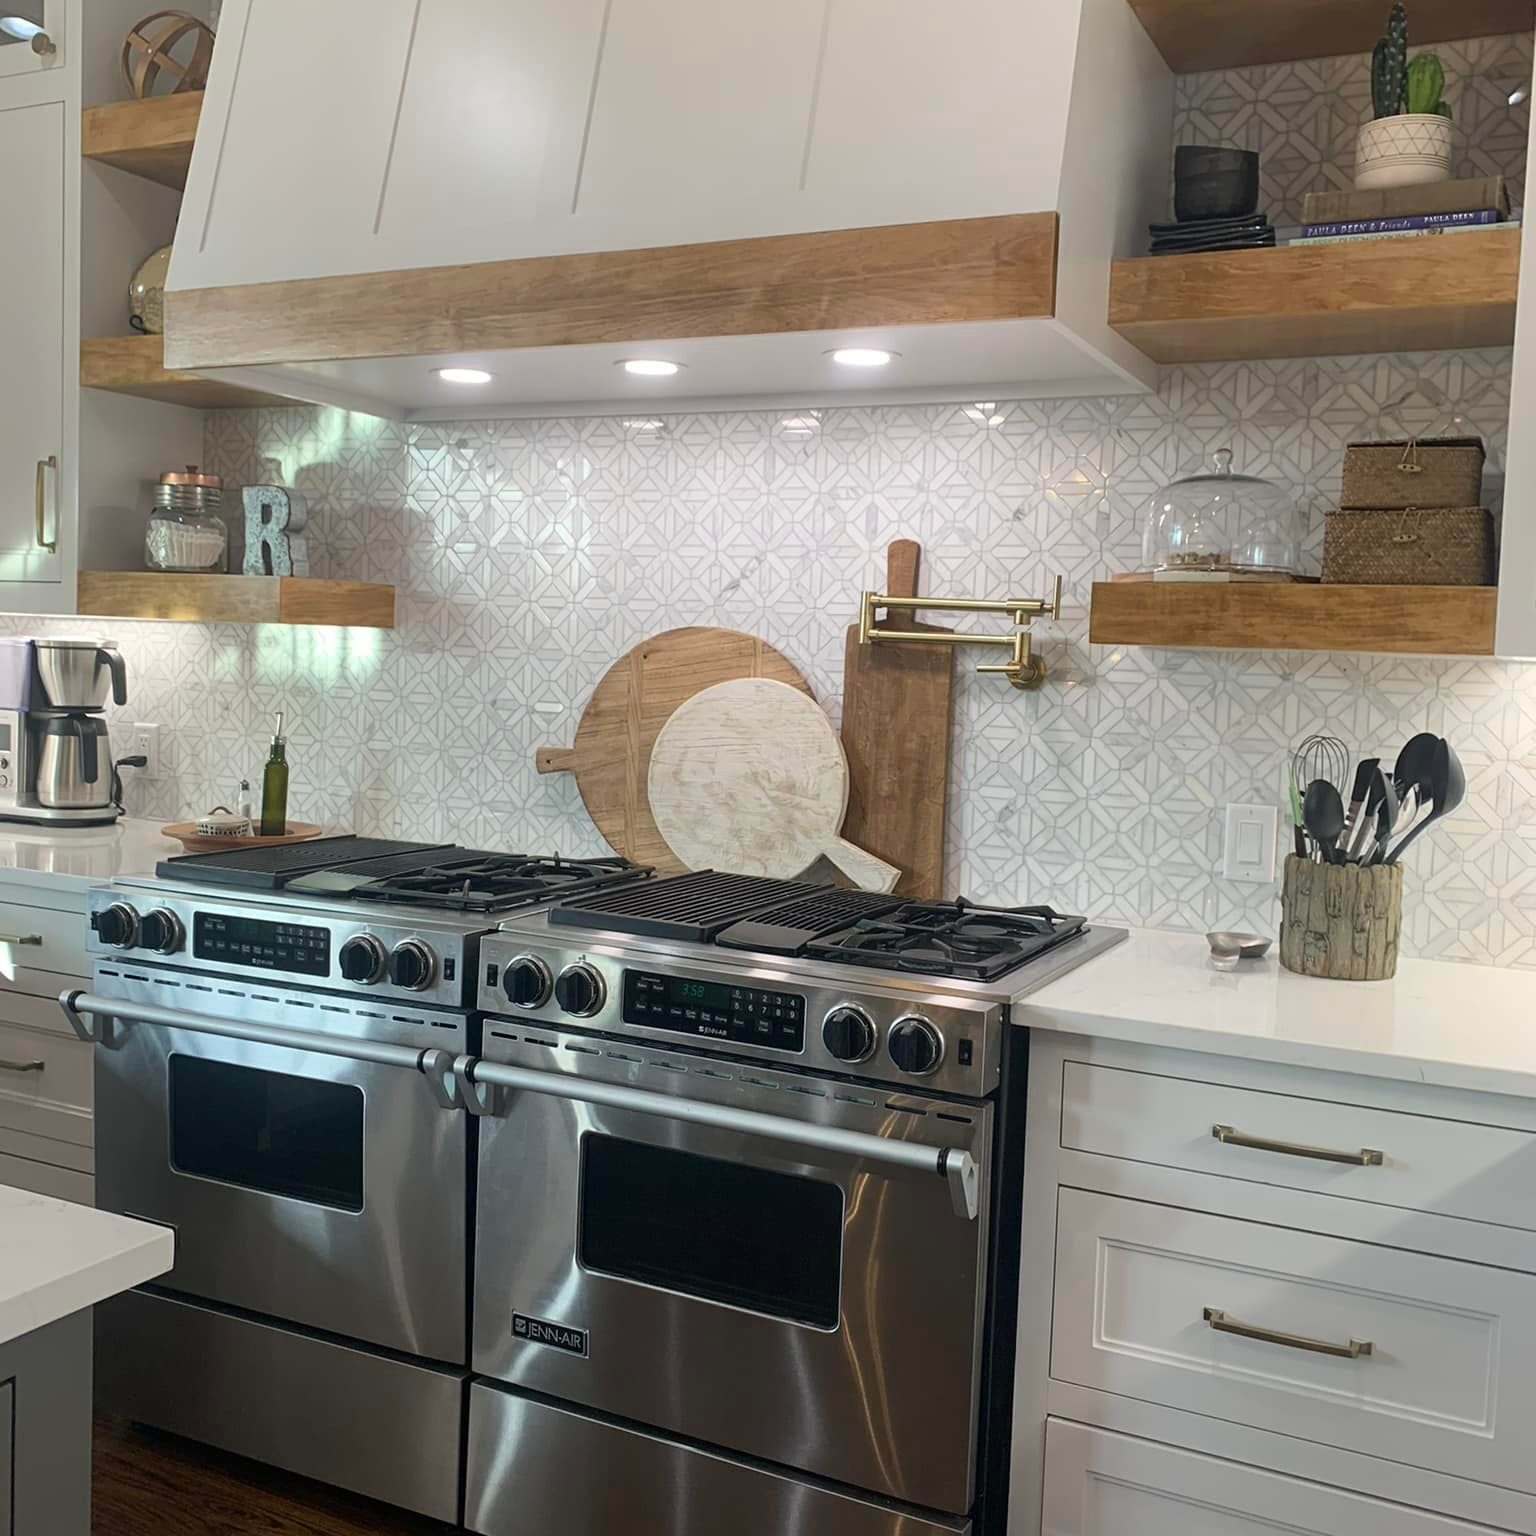 Kitchen Remodeling Services, Renovation and Construction Services by a Professional Contractor | Spire Construction, Dallas, TX | Page Featured Image